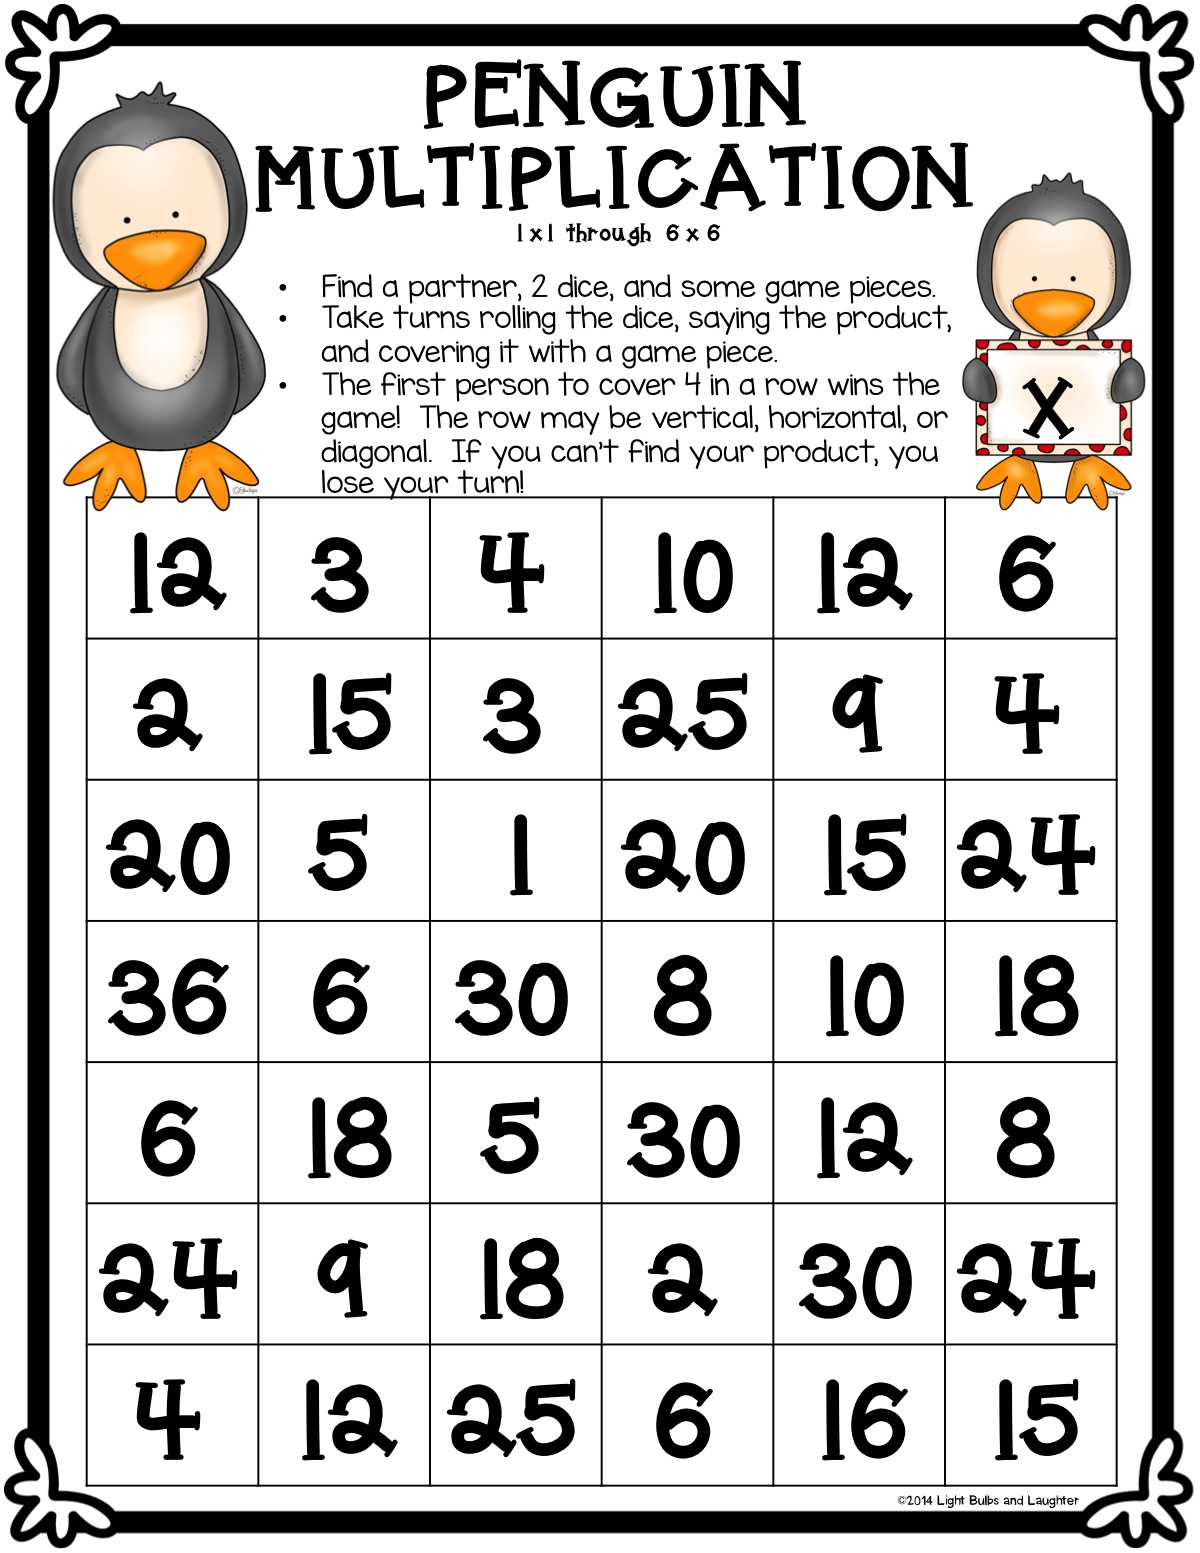 FREE Penguin Multiplication Game from Light Bulbs and Laughter